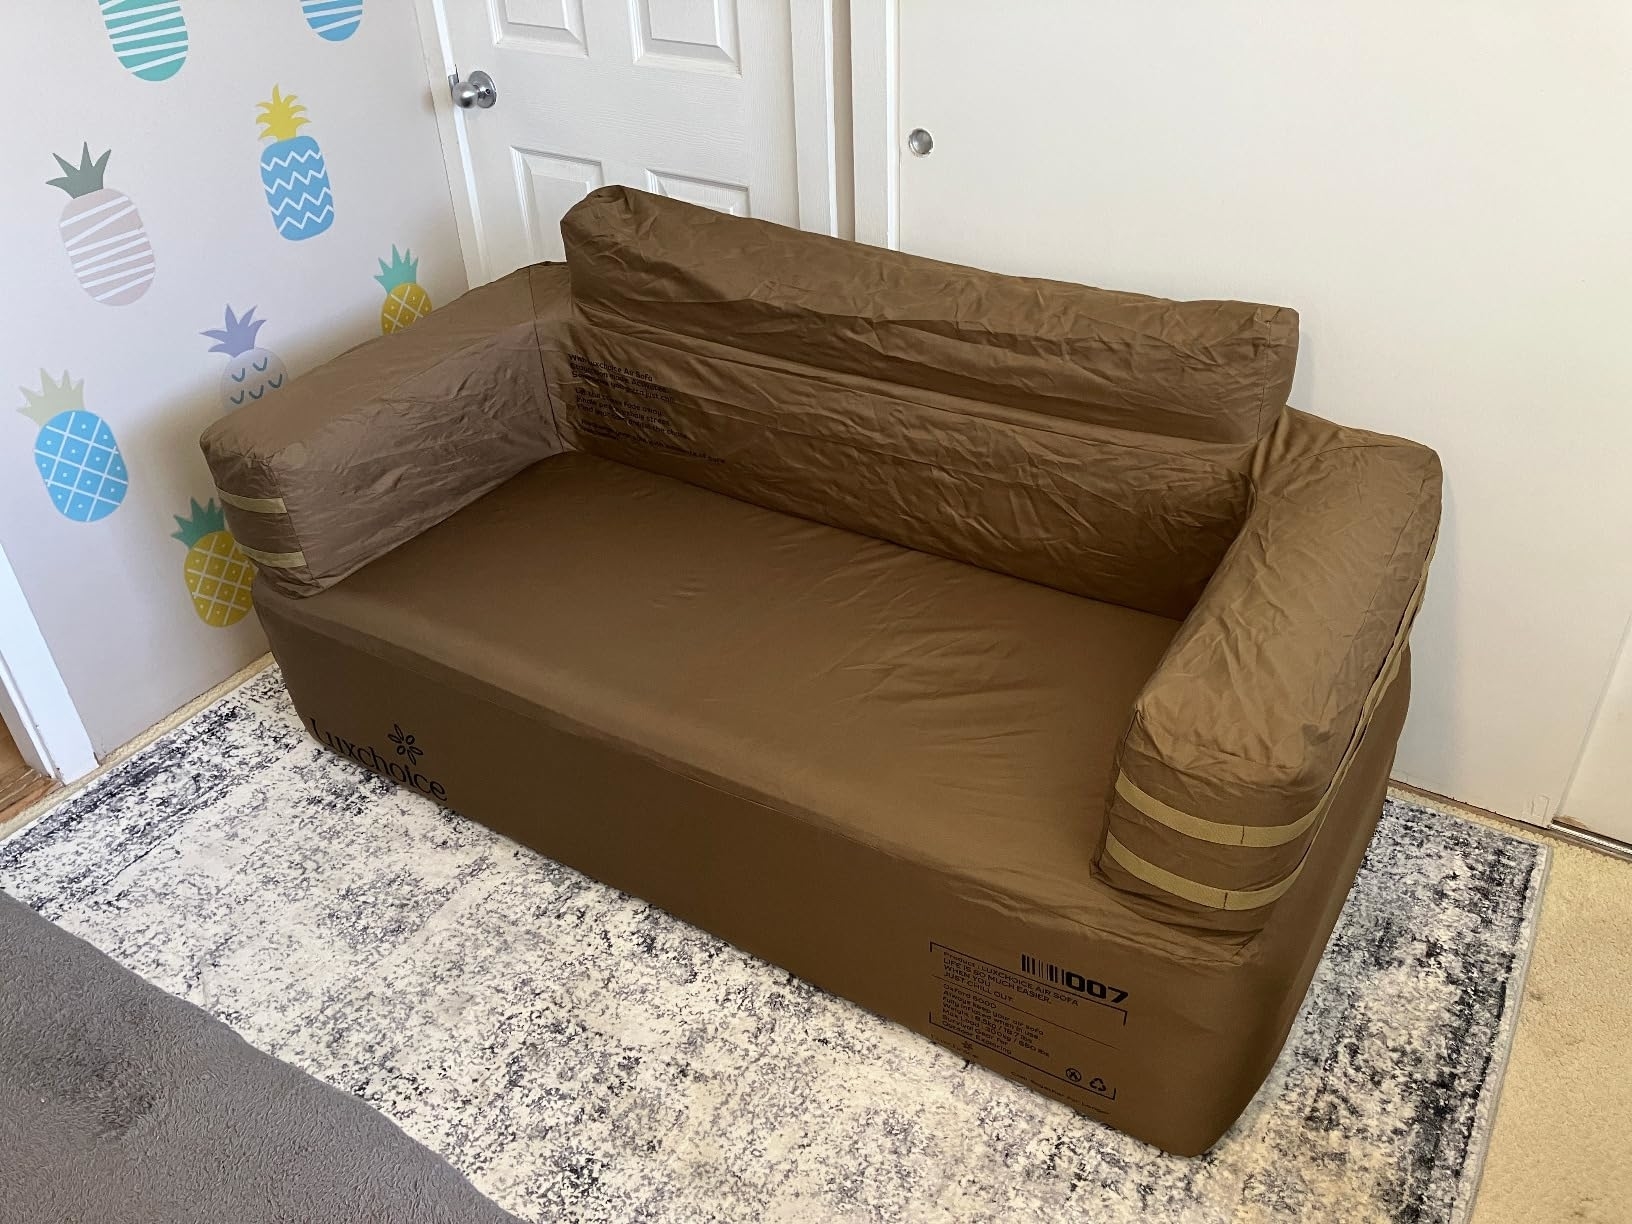 Inflatable couch in a room with decorative wall and patterned rug, suitable for casual home furnishing